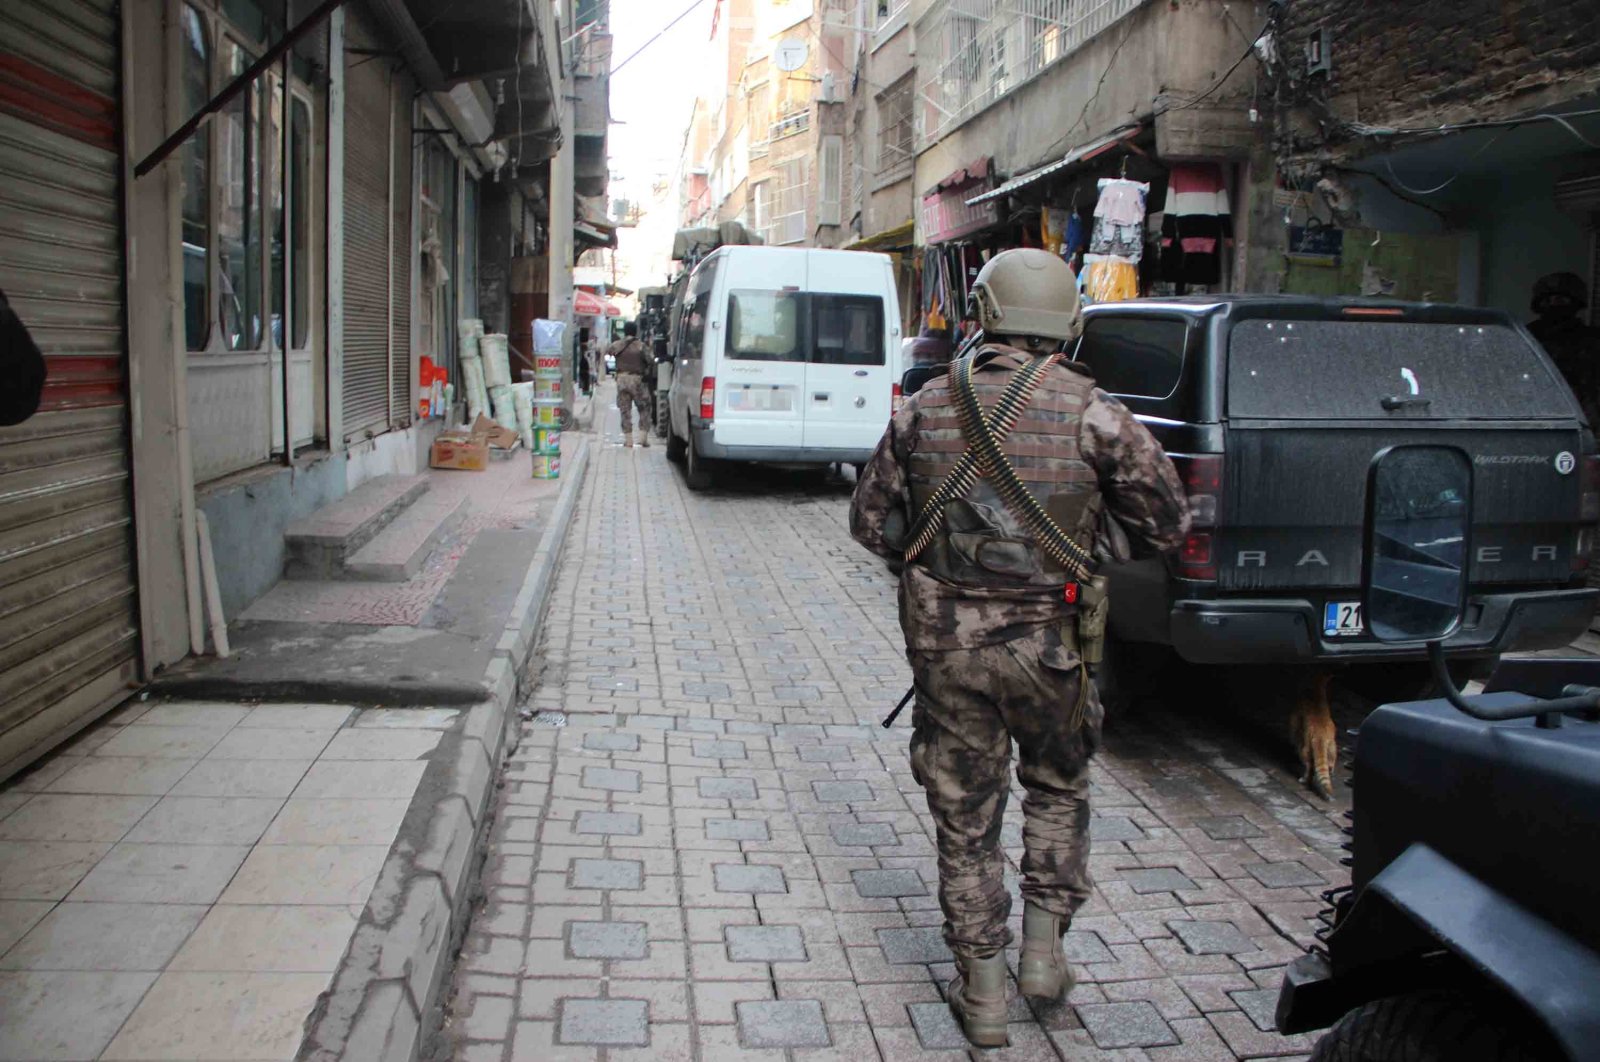 A counterterrorism police officer takes part in an anti-terror operation in Turkey's Diyarbakır province in this undated file photo. (AA File Photo)